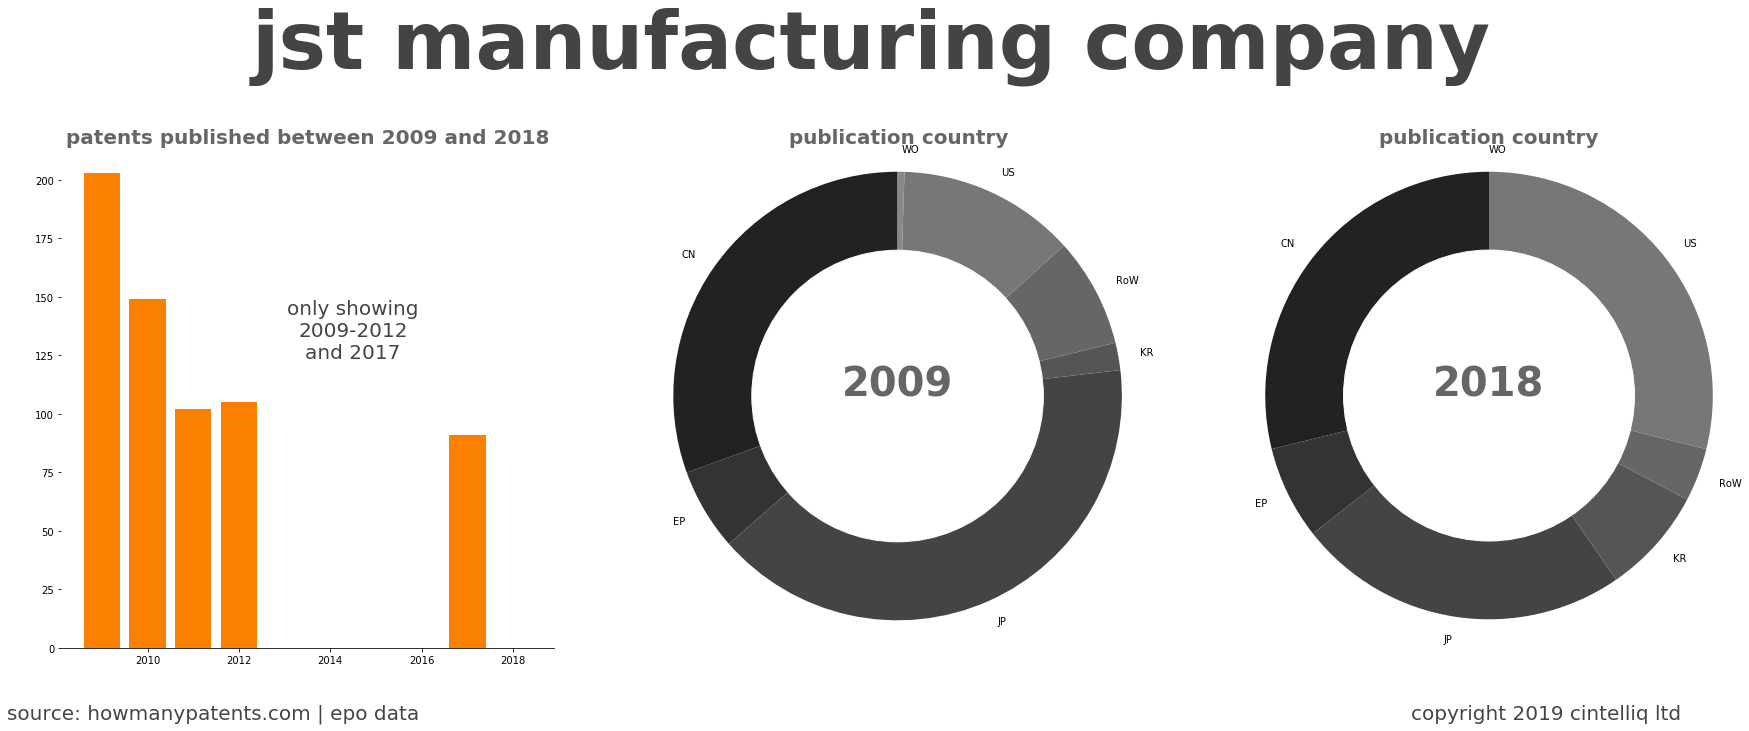 summary of patents for Jst Manufacturing Company